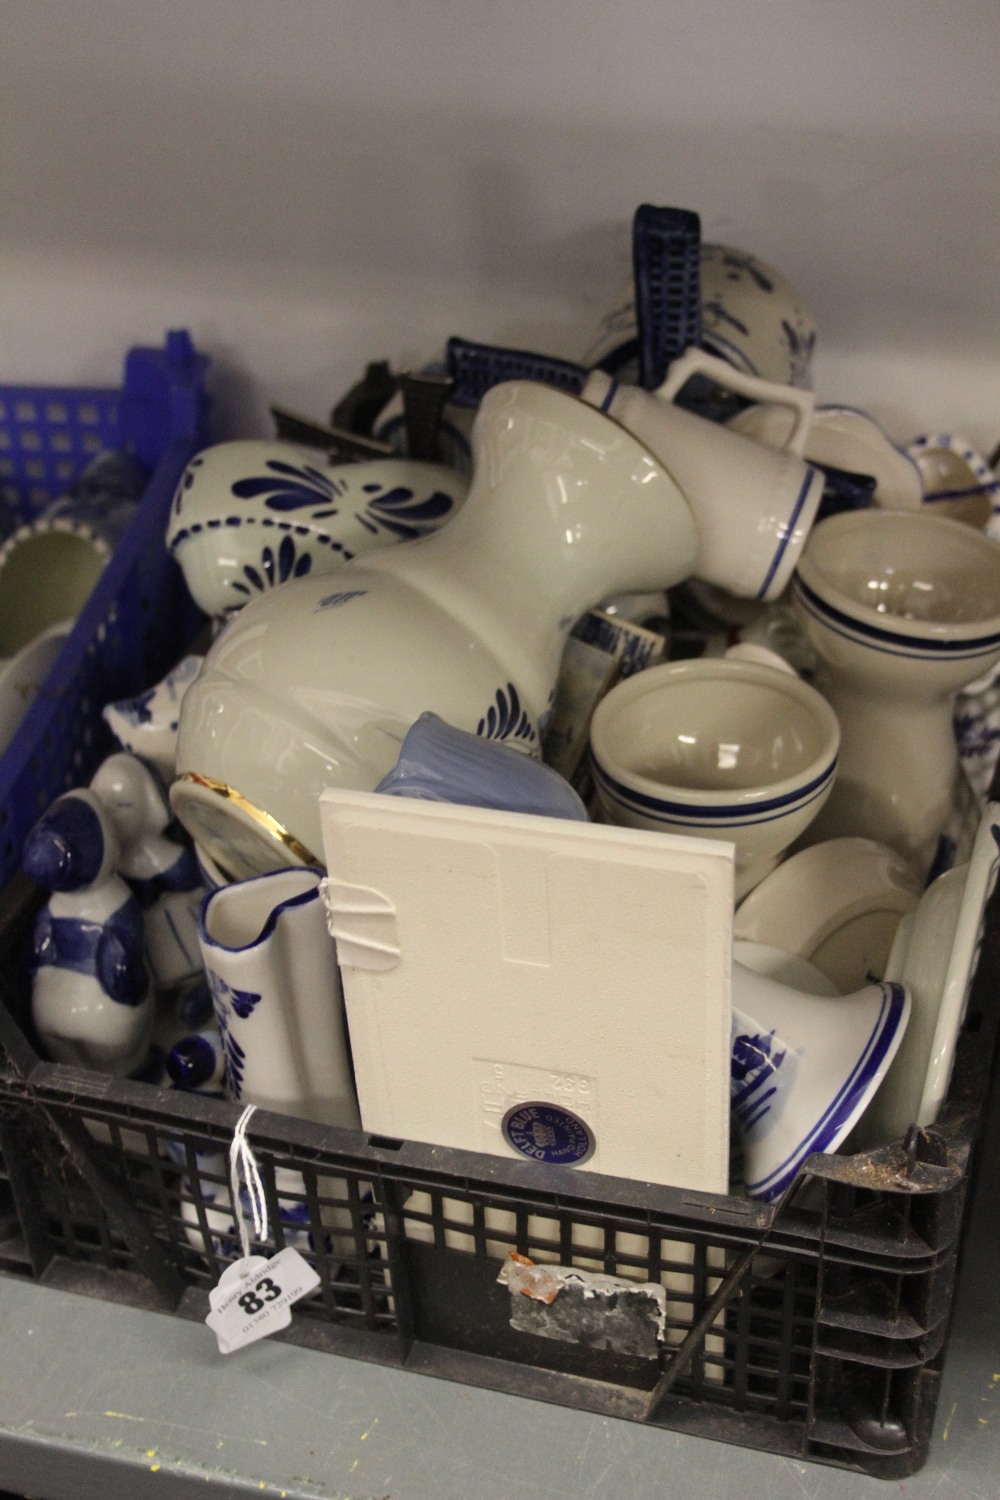 20th cent. Ceramics: Delft, blue and white, 2 musical windmills, cat and cow jugs, small tiles,